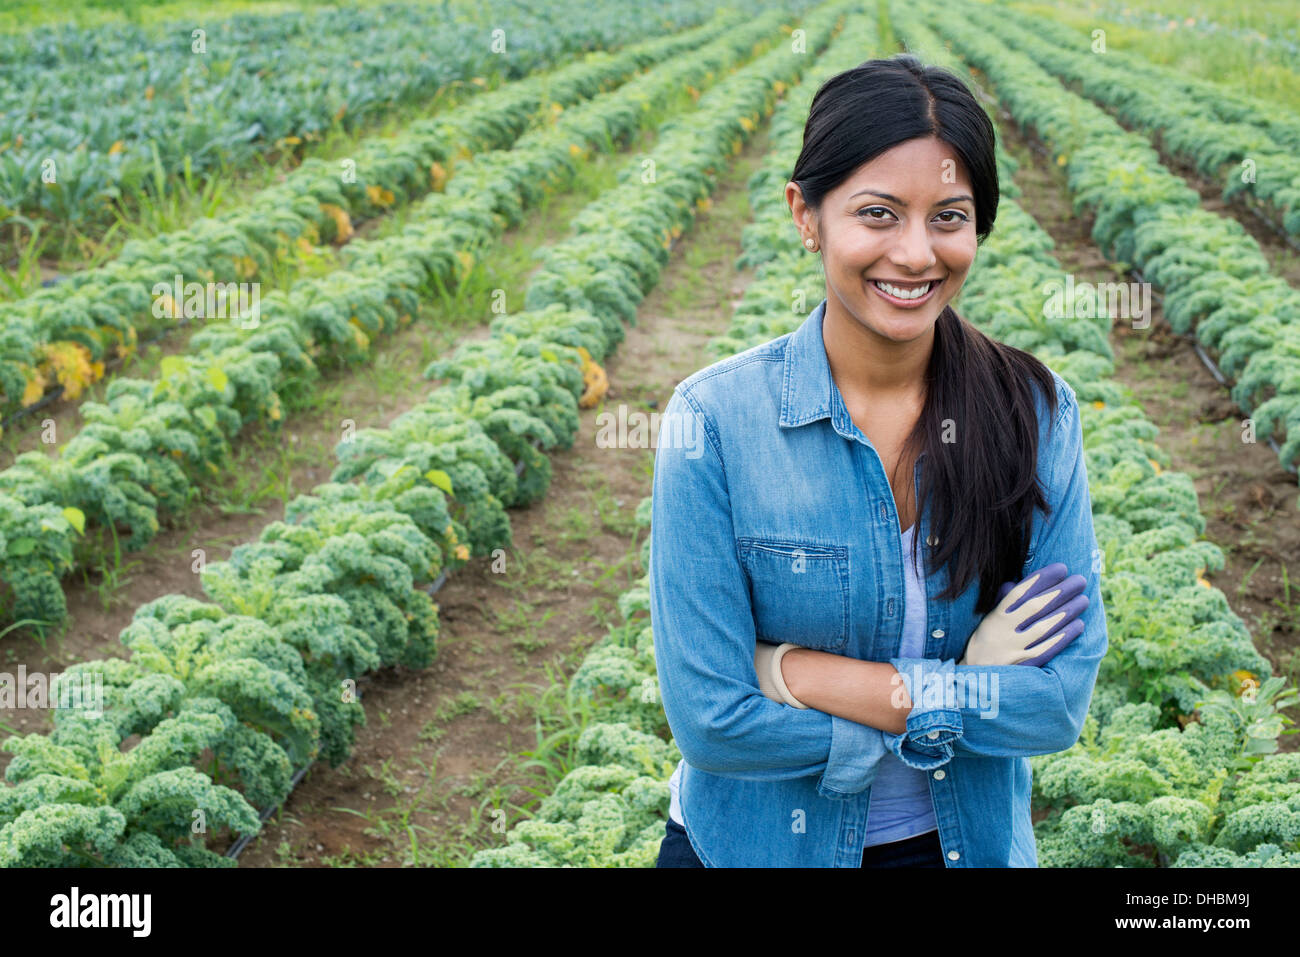 Rows of curly green vegetable plants growing on an organic farm.  A man inspecting the crop. Stock Photo